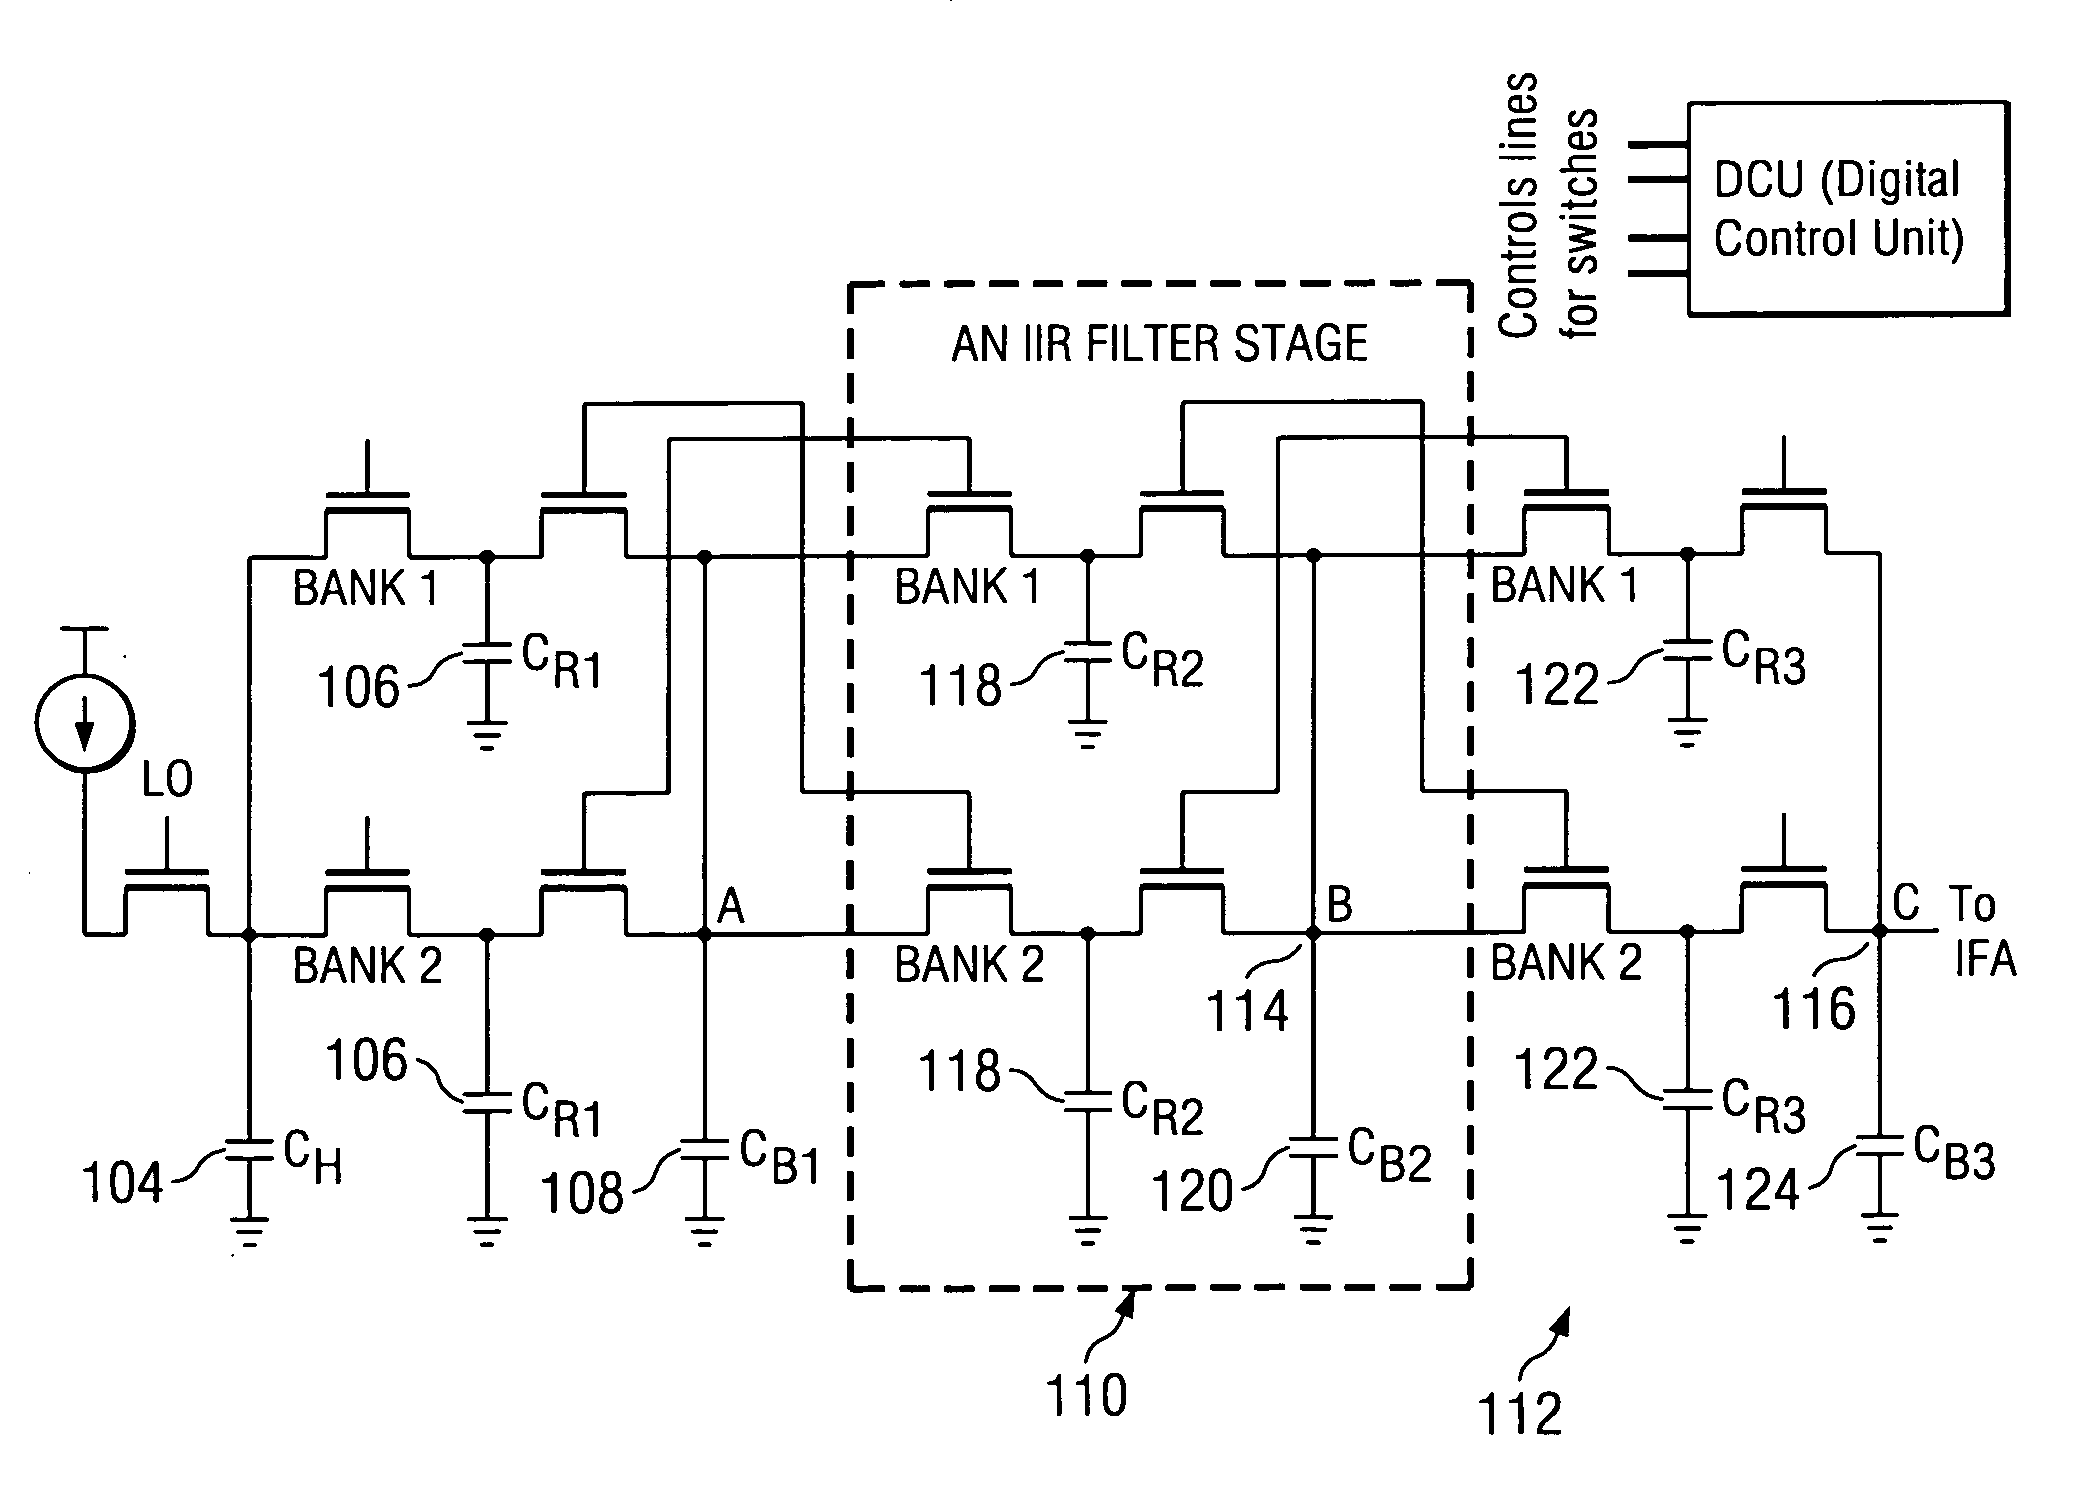 Technique for improving antialiasing and adjacent channel interference filtering using cascaded passive IIR filter stages combined with direct sampling and mixing